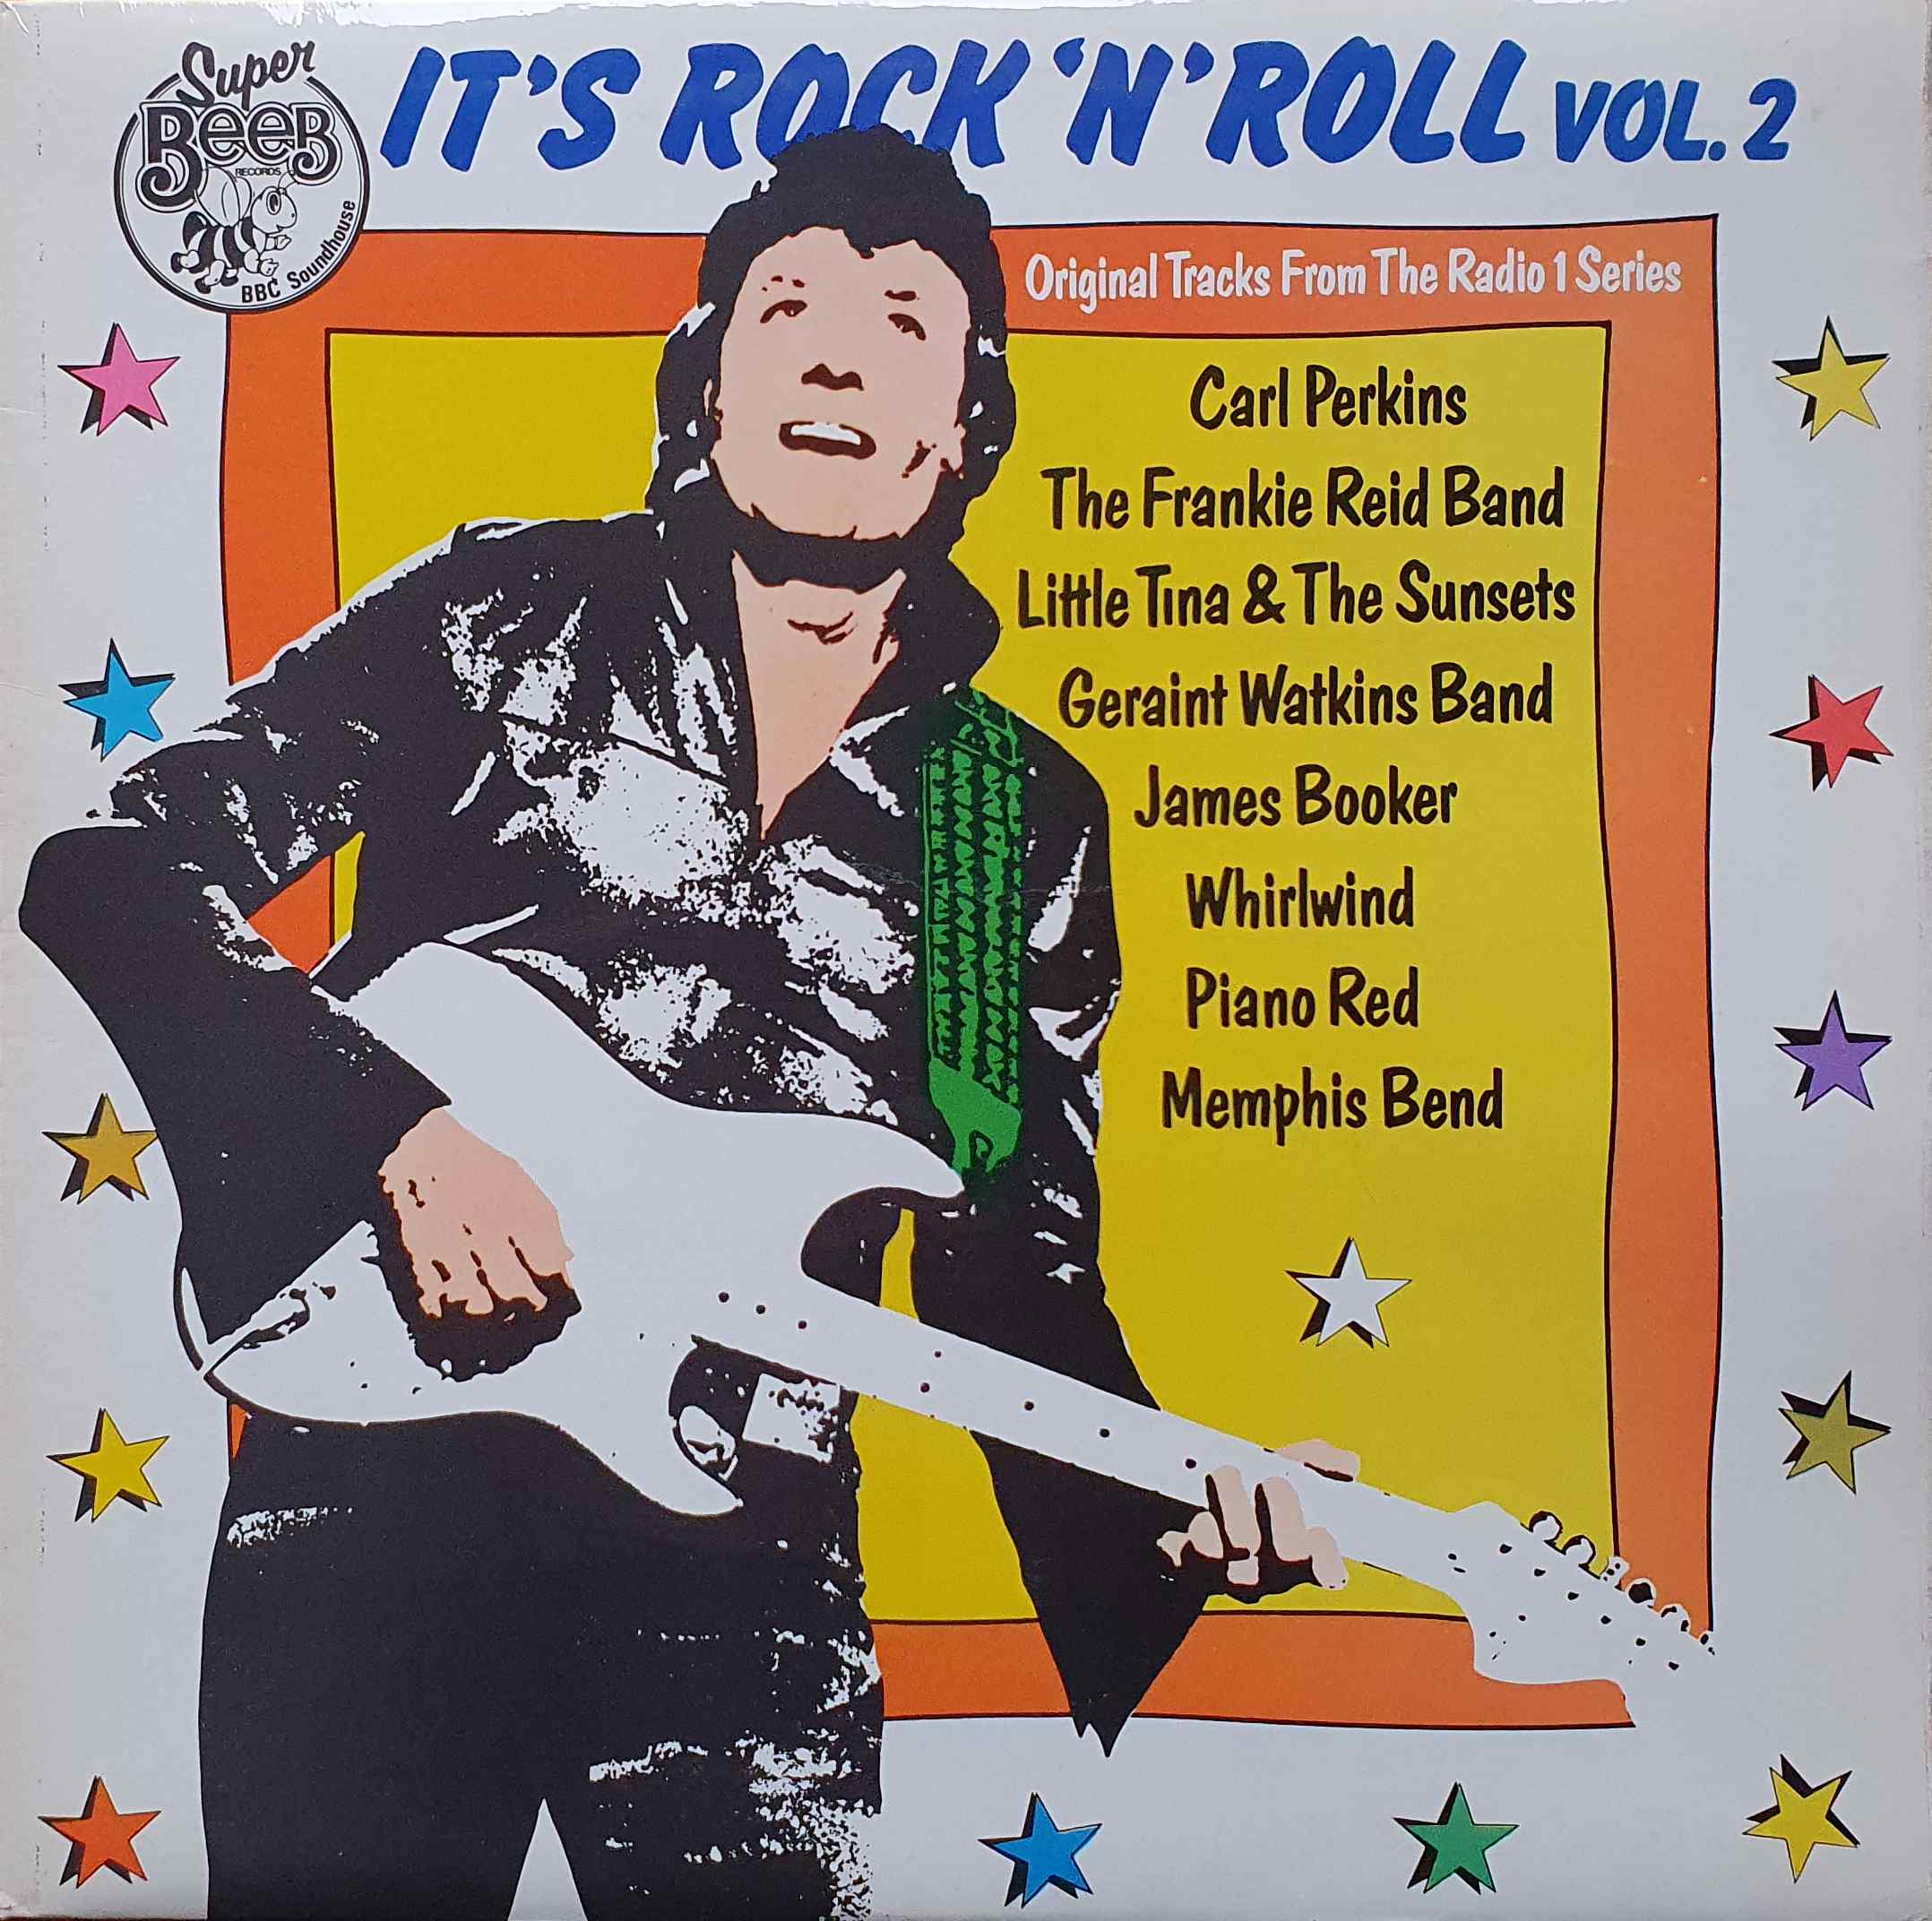 Picture of Its rock n roll - Volume 2 by artist Various from the BBC albums - Records and Tapes library